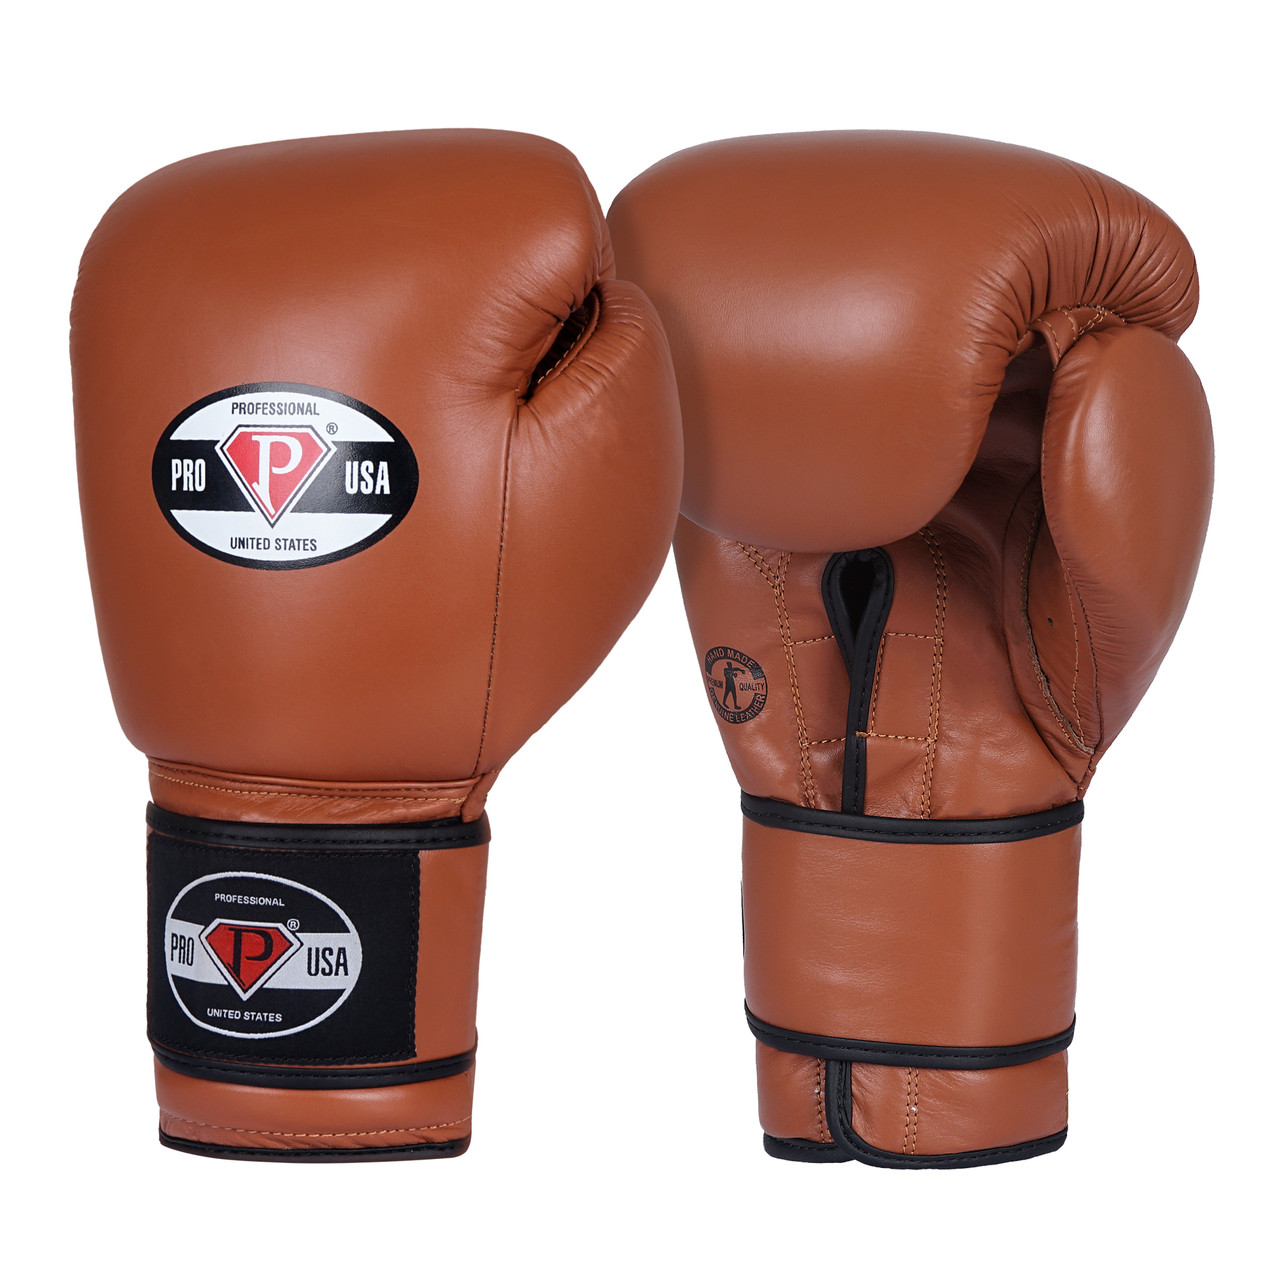 Pro USA Professional Hook-N-Loop Boxing Gloves Brown Leather